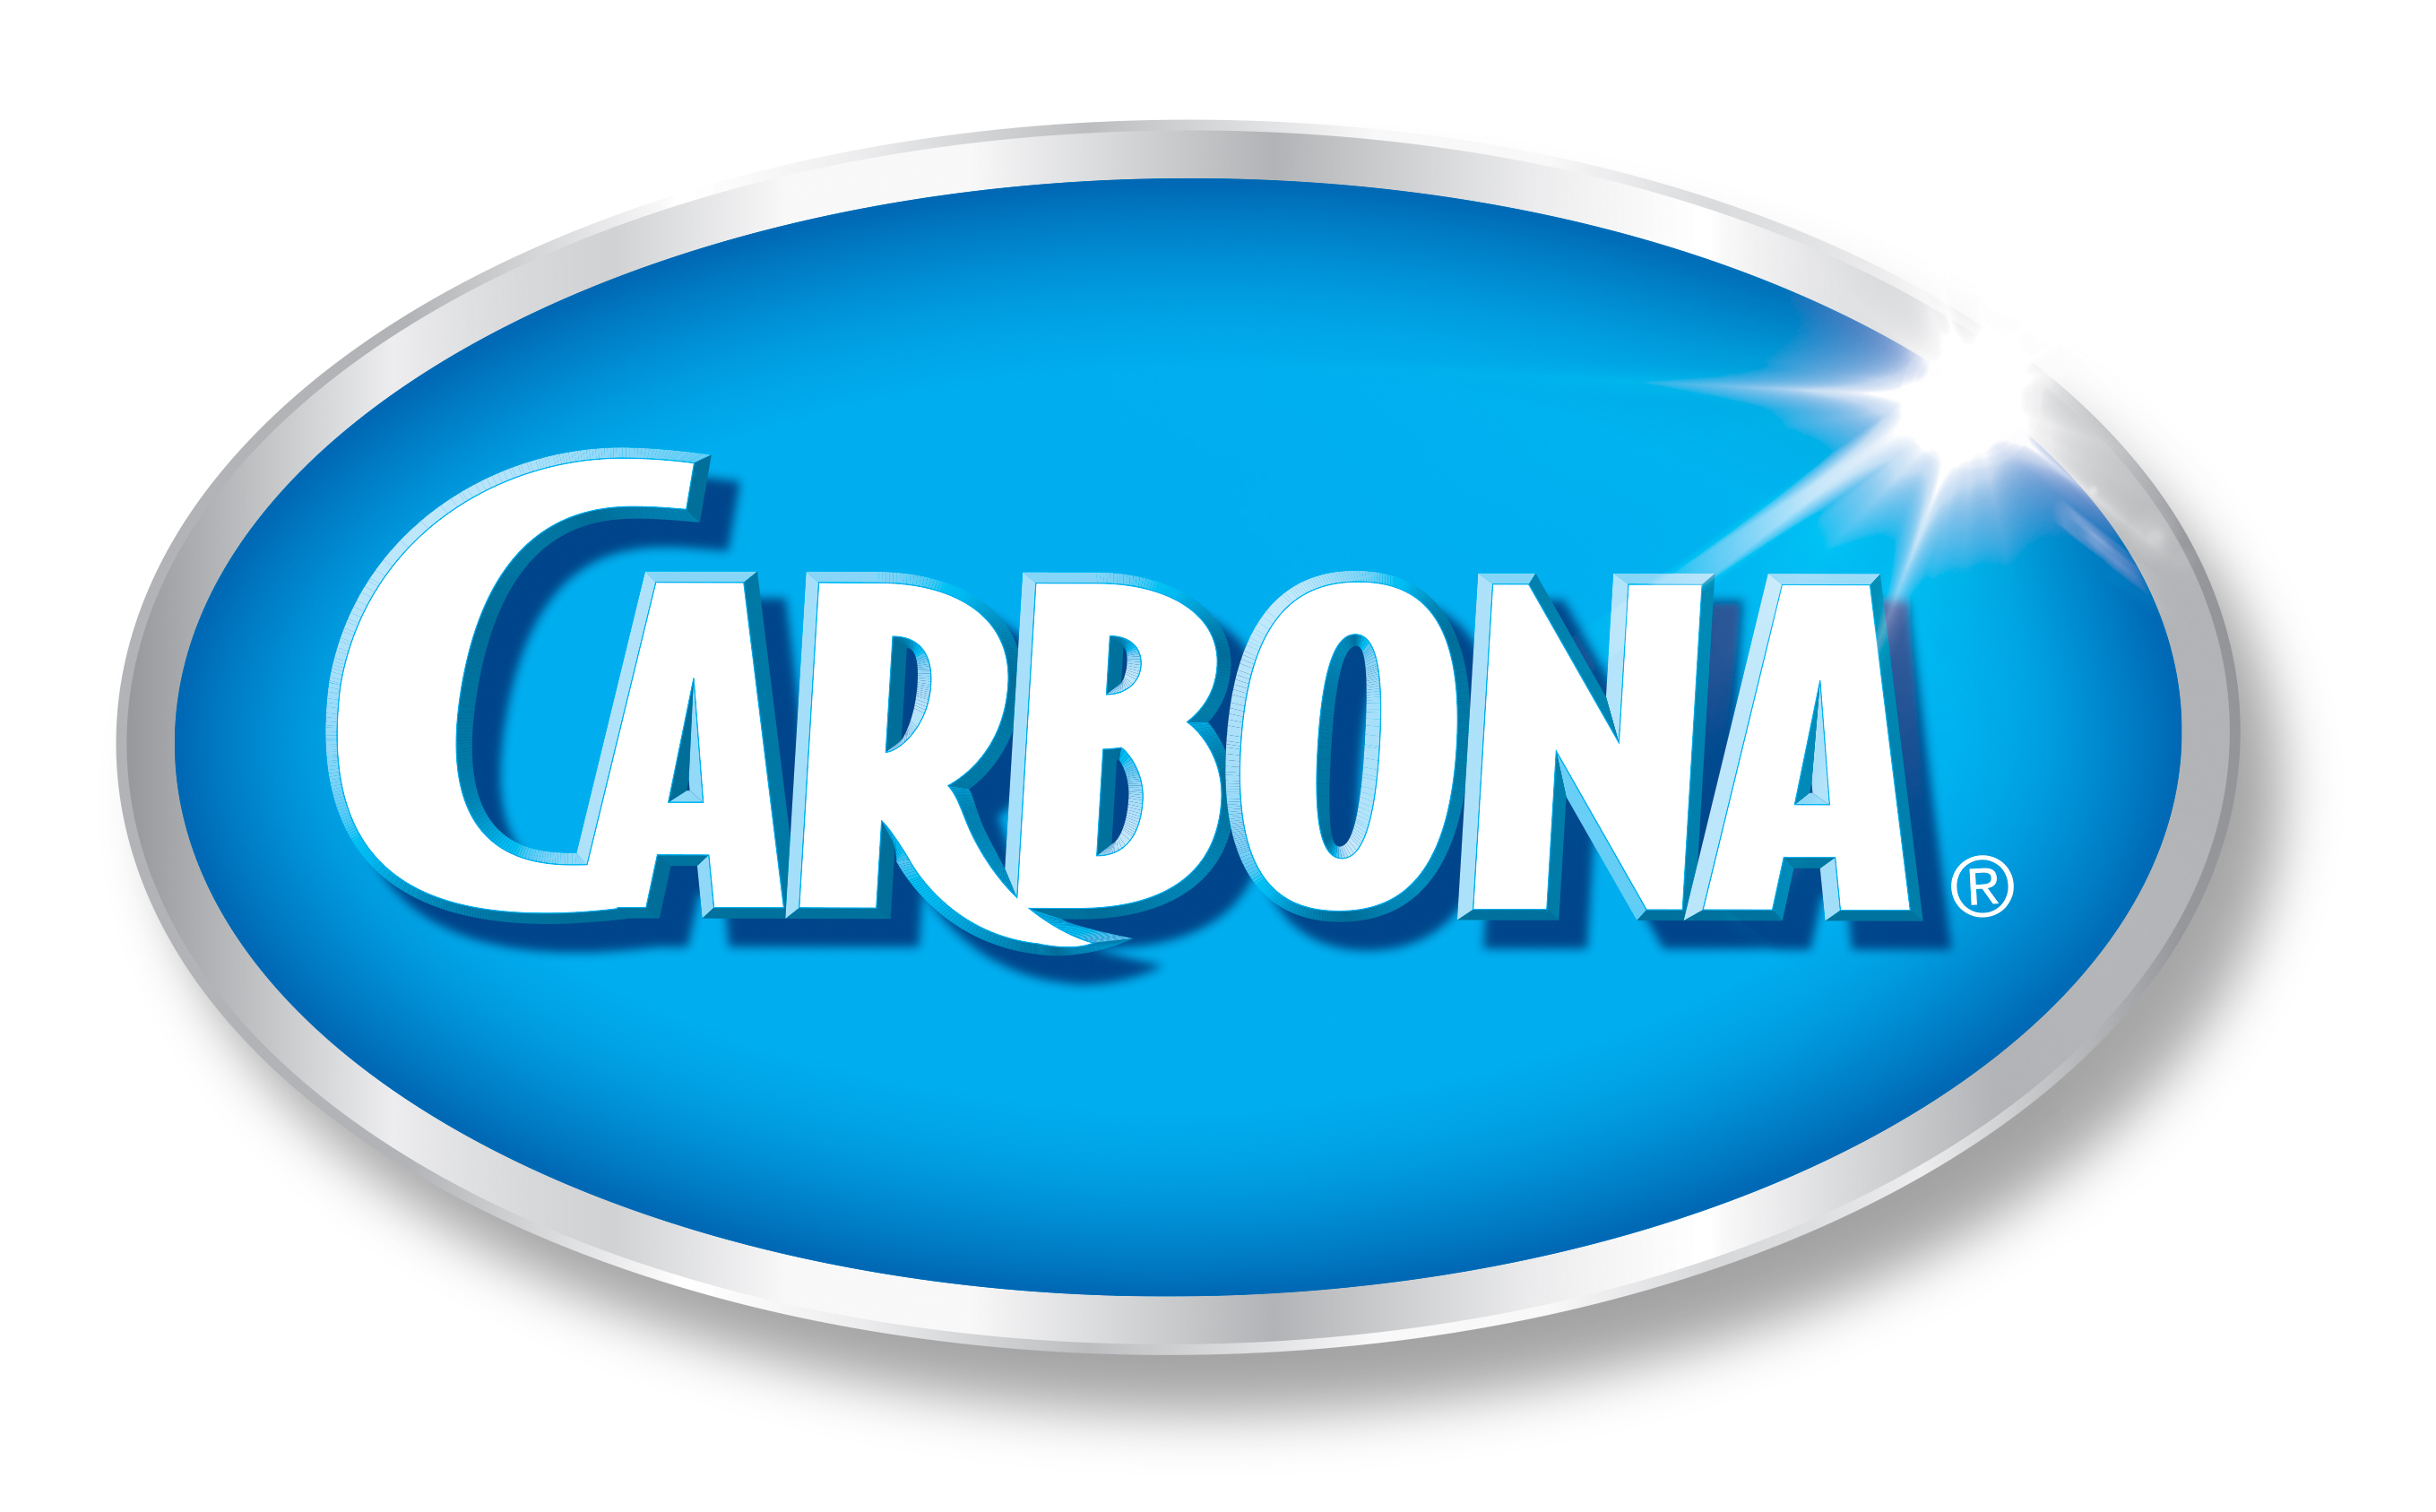 Carbona Pro Care Outdoor Cleaner Voted Product of the Year 2021